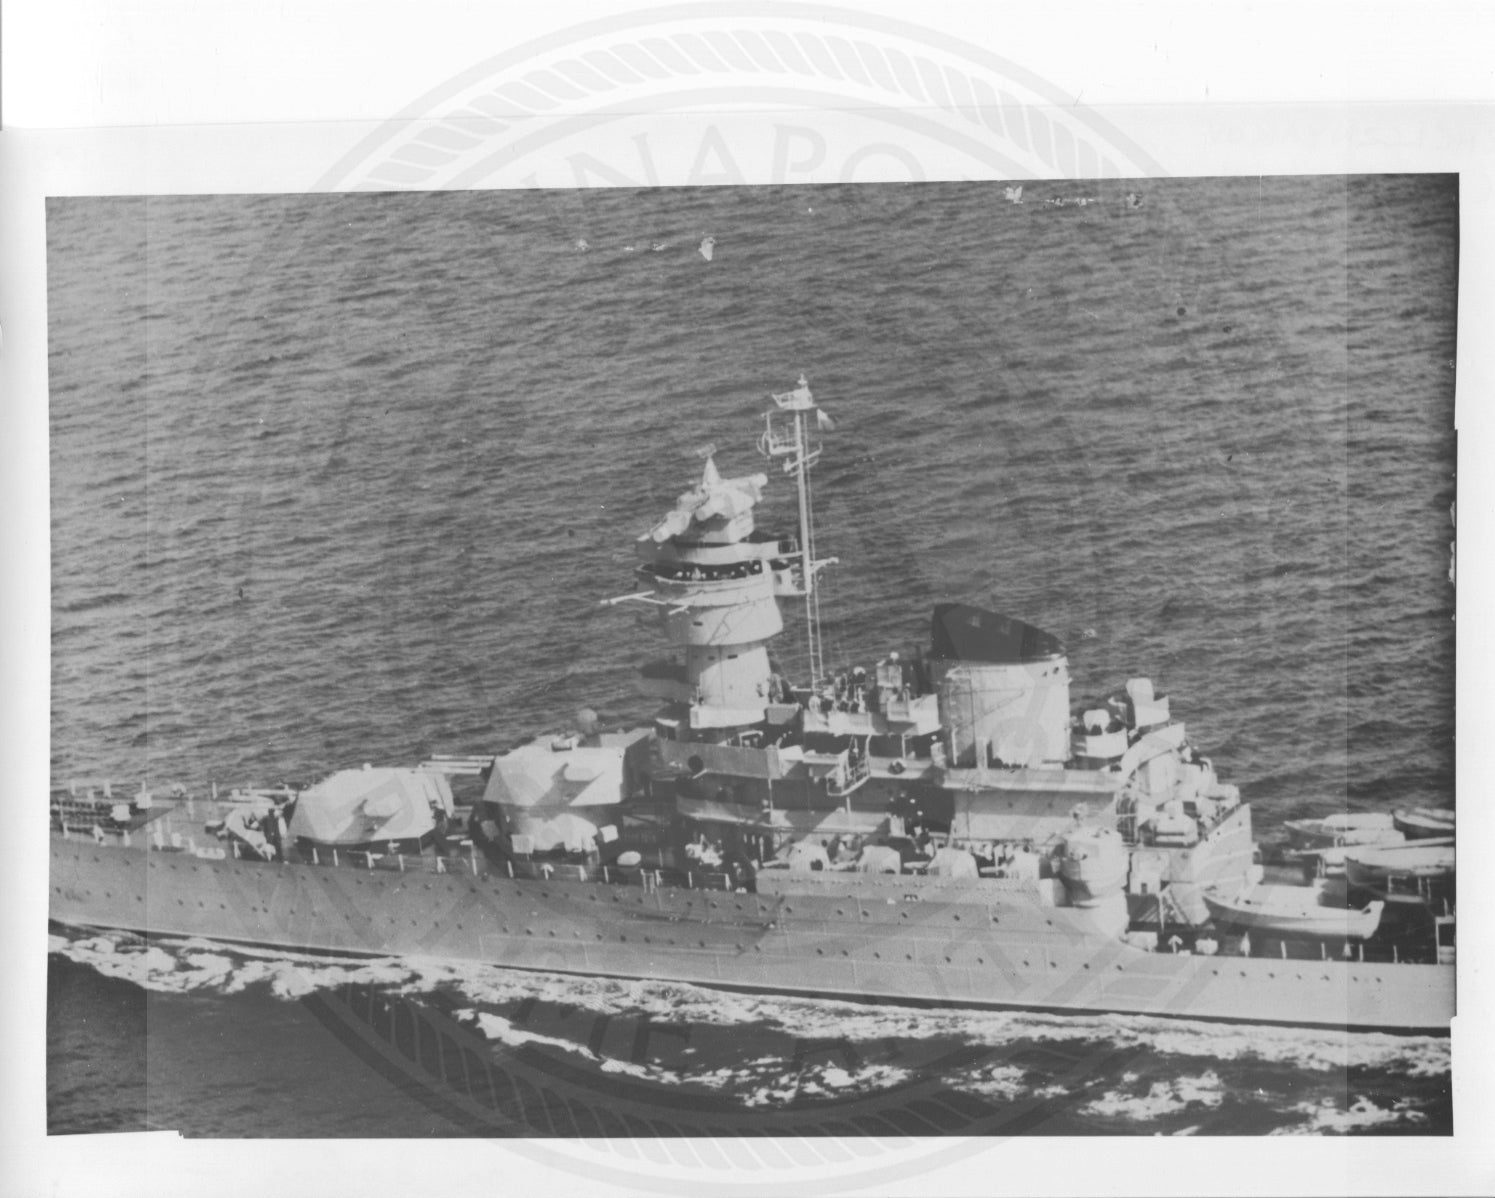 Official U.S. Navy photo the Soviet missile cruiser Chapayev class - Annapolis Maritime Antiques